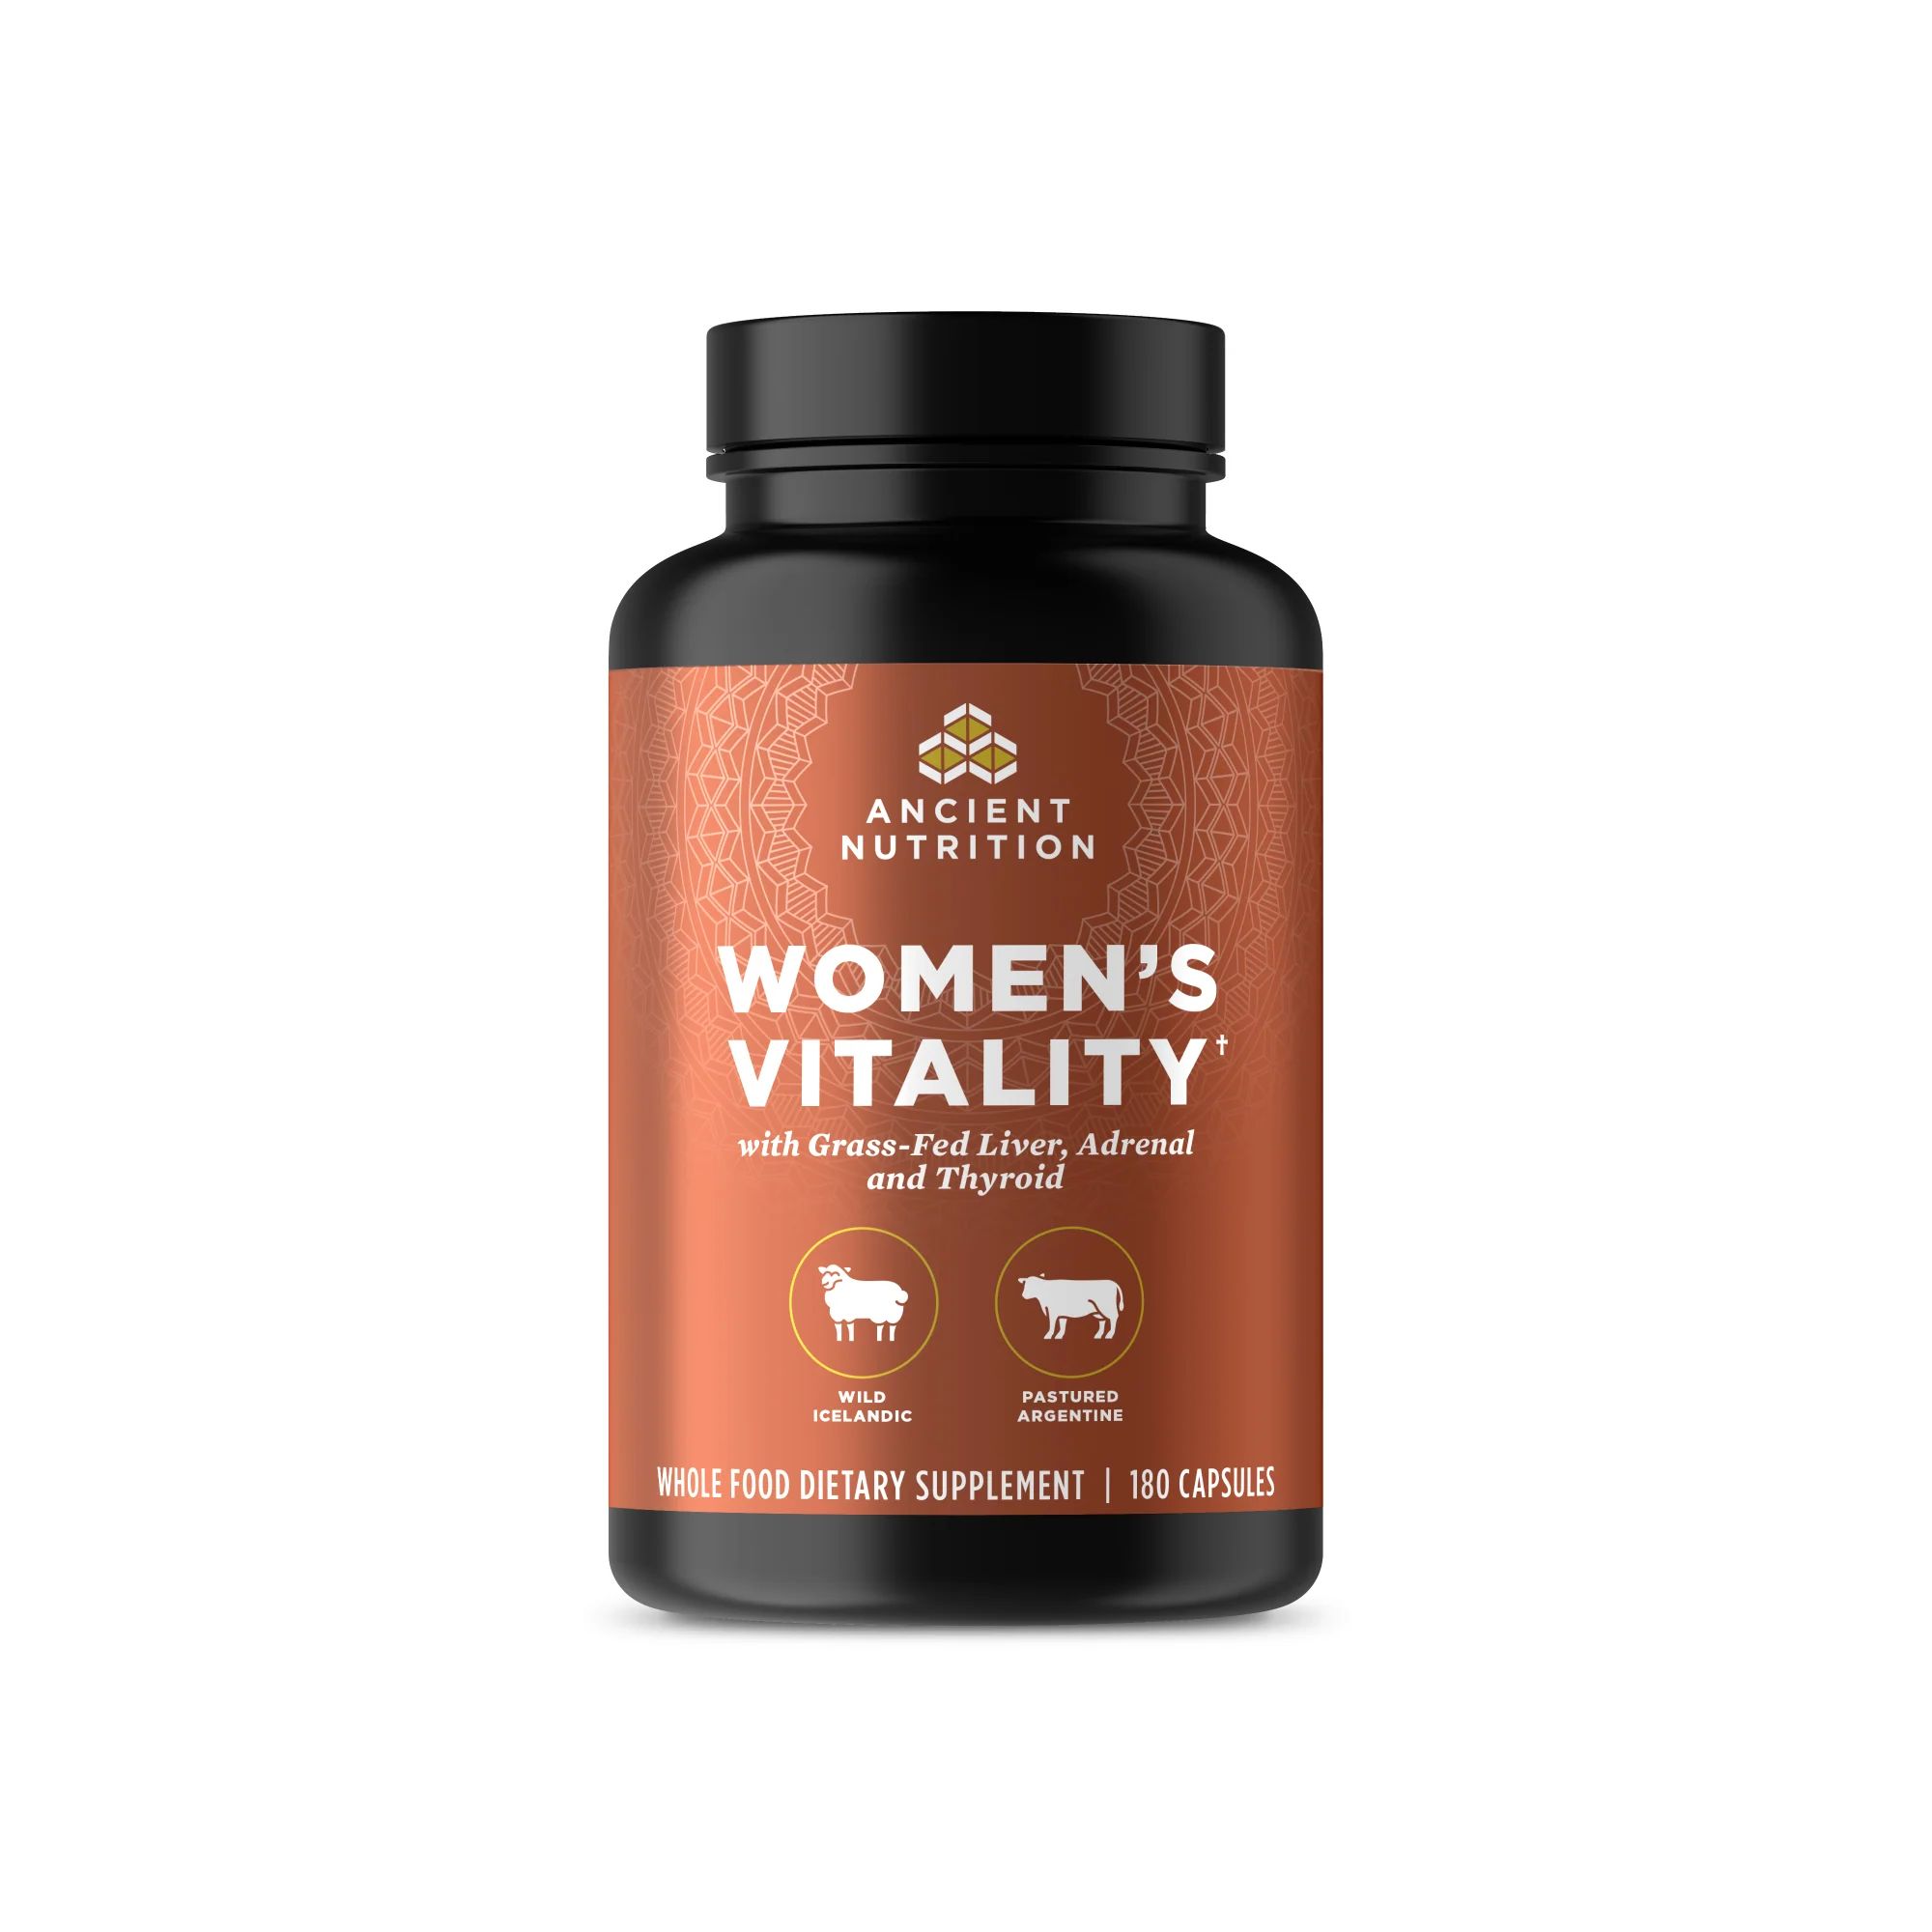 Women's Vitality | Ancient Nutrition